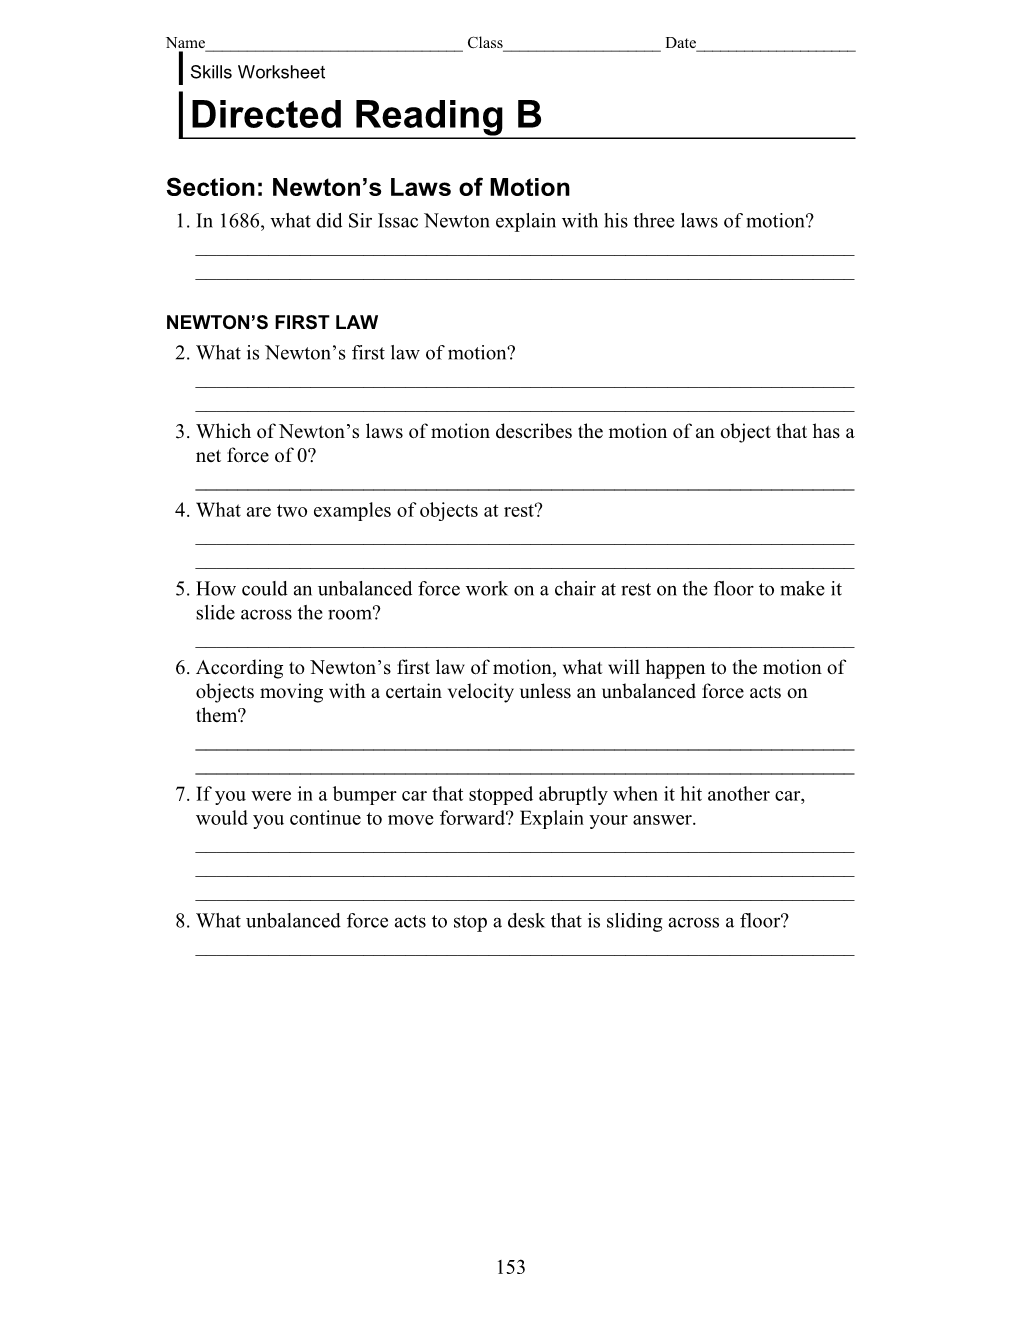 Section: Newton S Laws of Motion